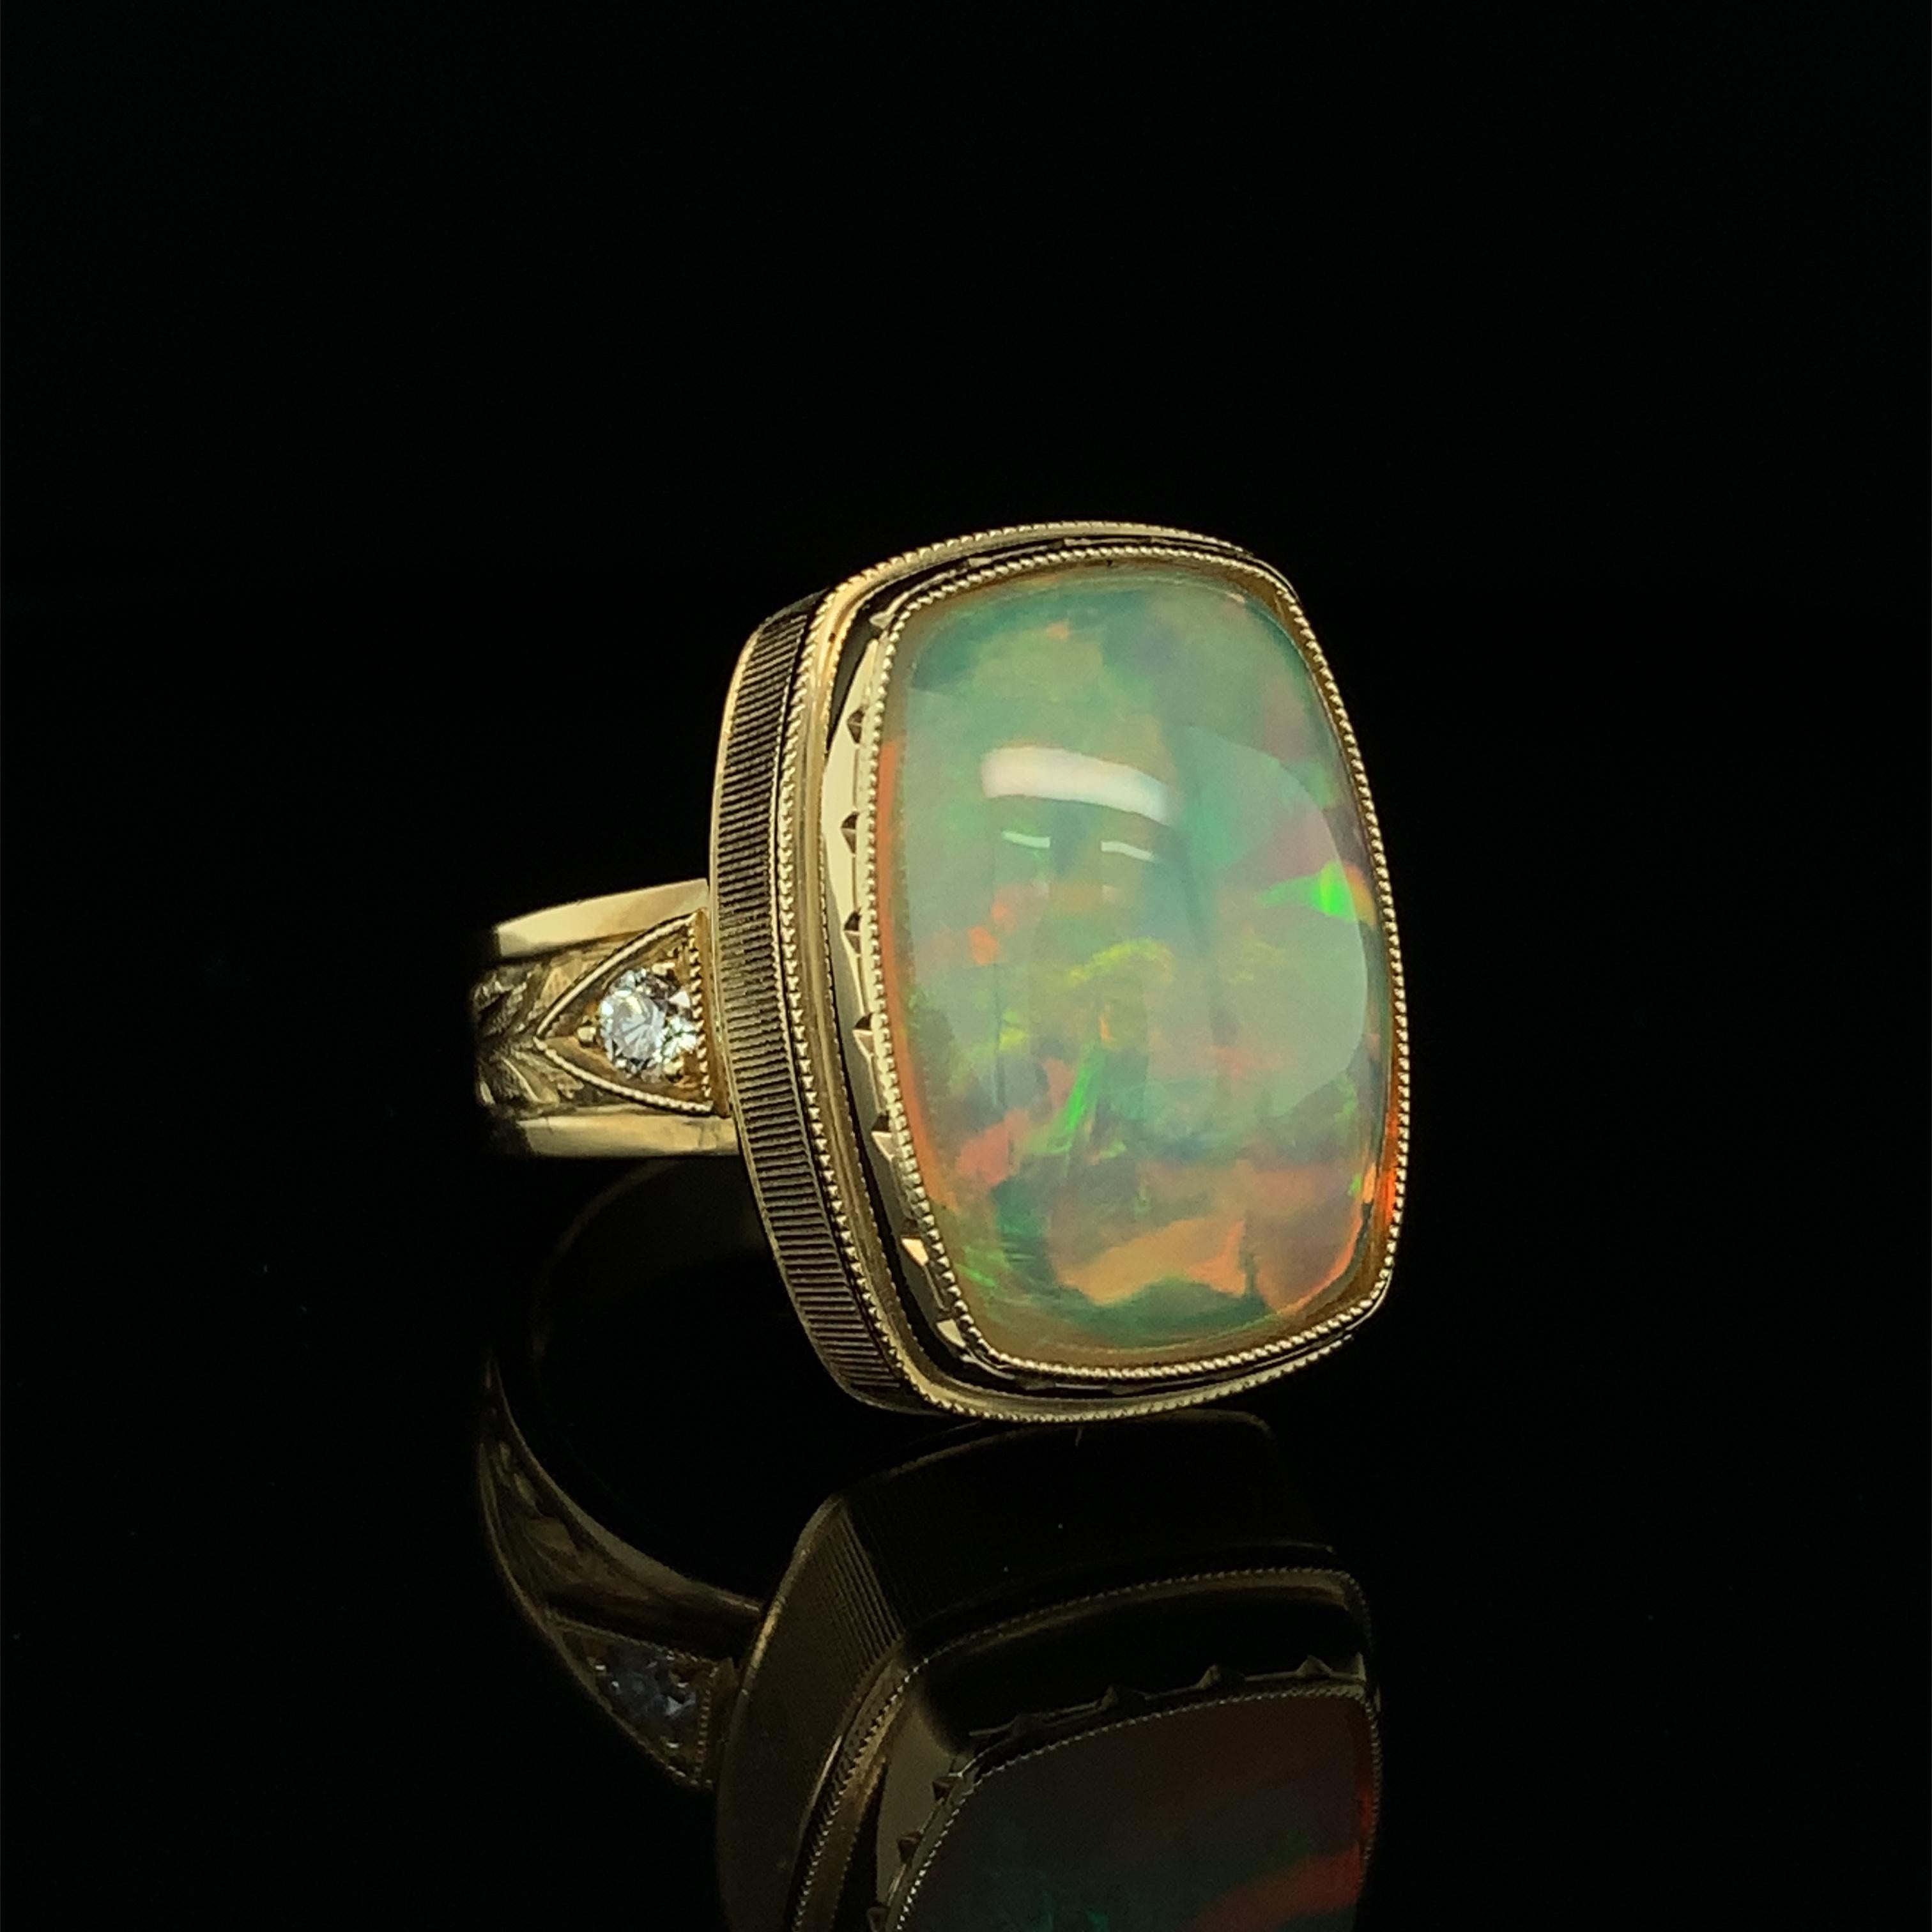 A beautiful cushion-shaped Ethiopian opal weighing 9.62 carats is featured in this handmade 18k yellow gold ring. Set in an intricately engraved bezel with 2 round brilliant diamonds, this opal comes to life with bright flashes of green, orange,